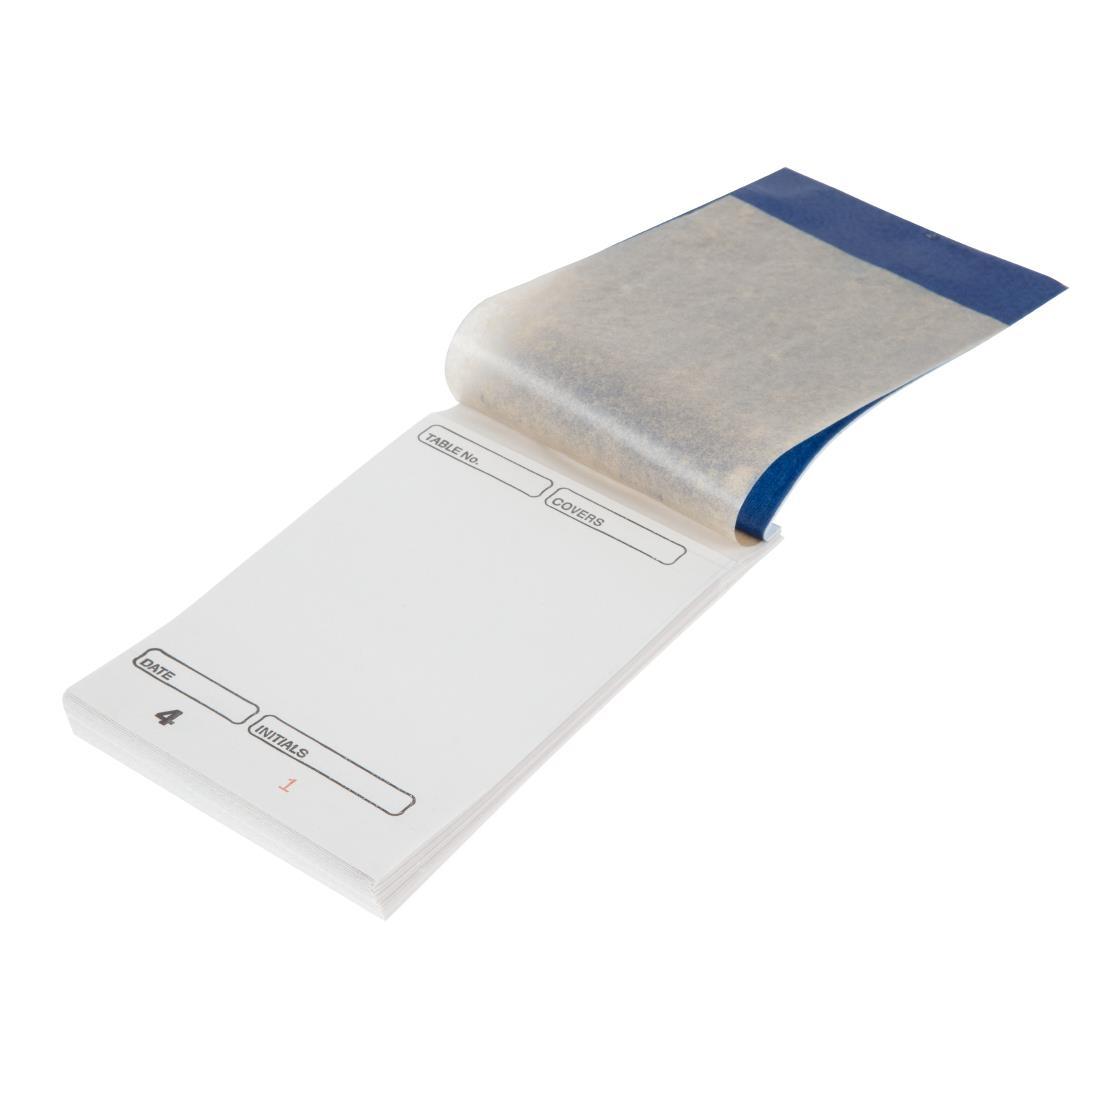 Restaurant Waiter Pads Duplicate Large (Pack of 50) - E168  - 3